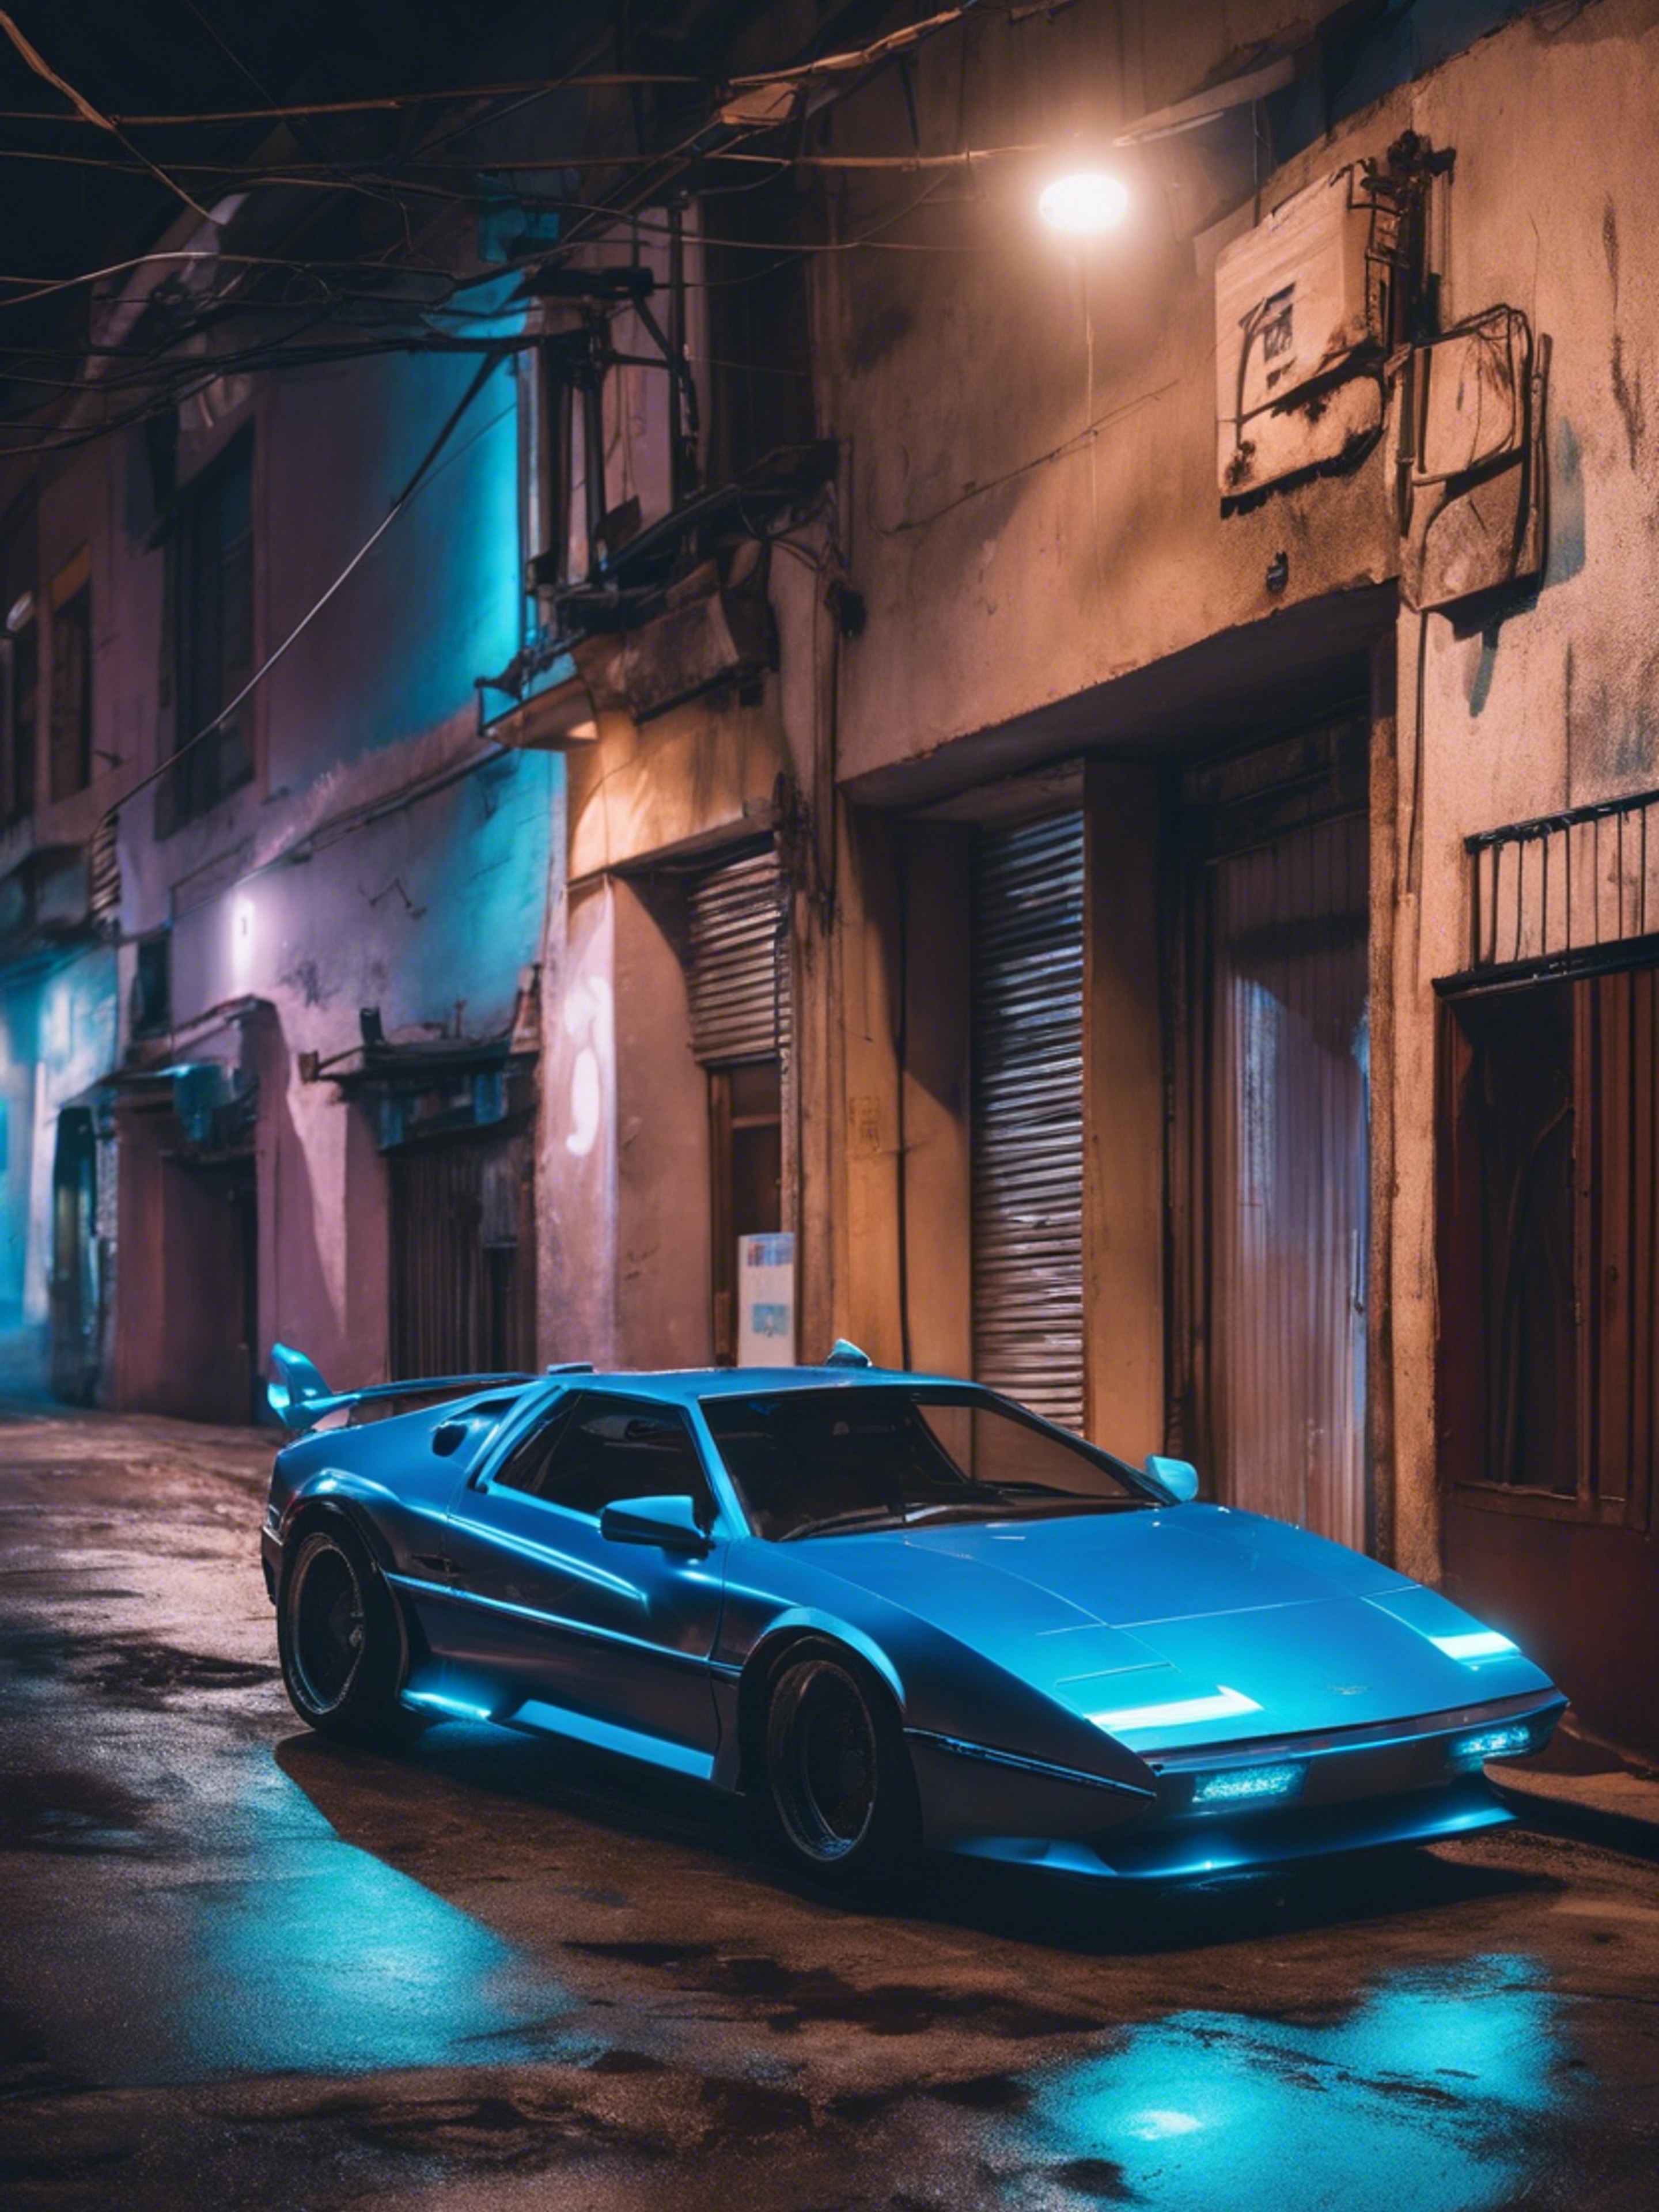 A cyberpunk themed sports car glowing with neon blue underlights parked in a dim alley. טפט[b442527eec5a4d00a6f1]